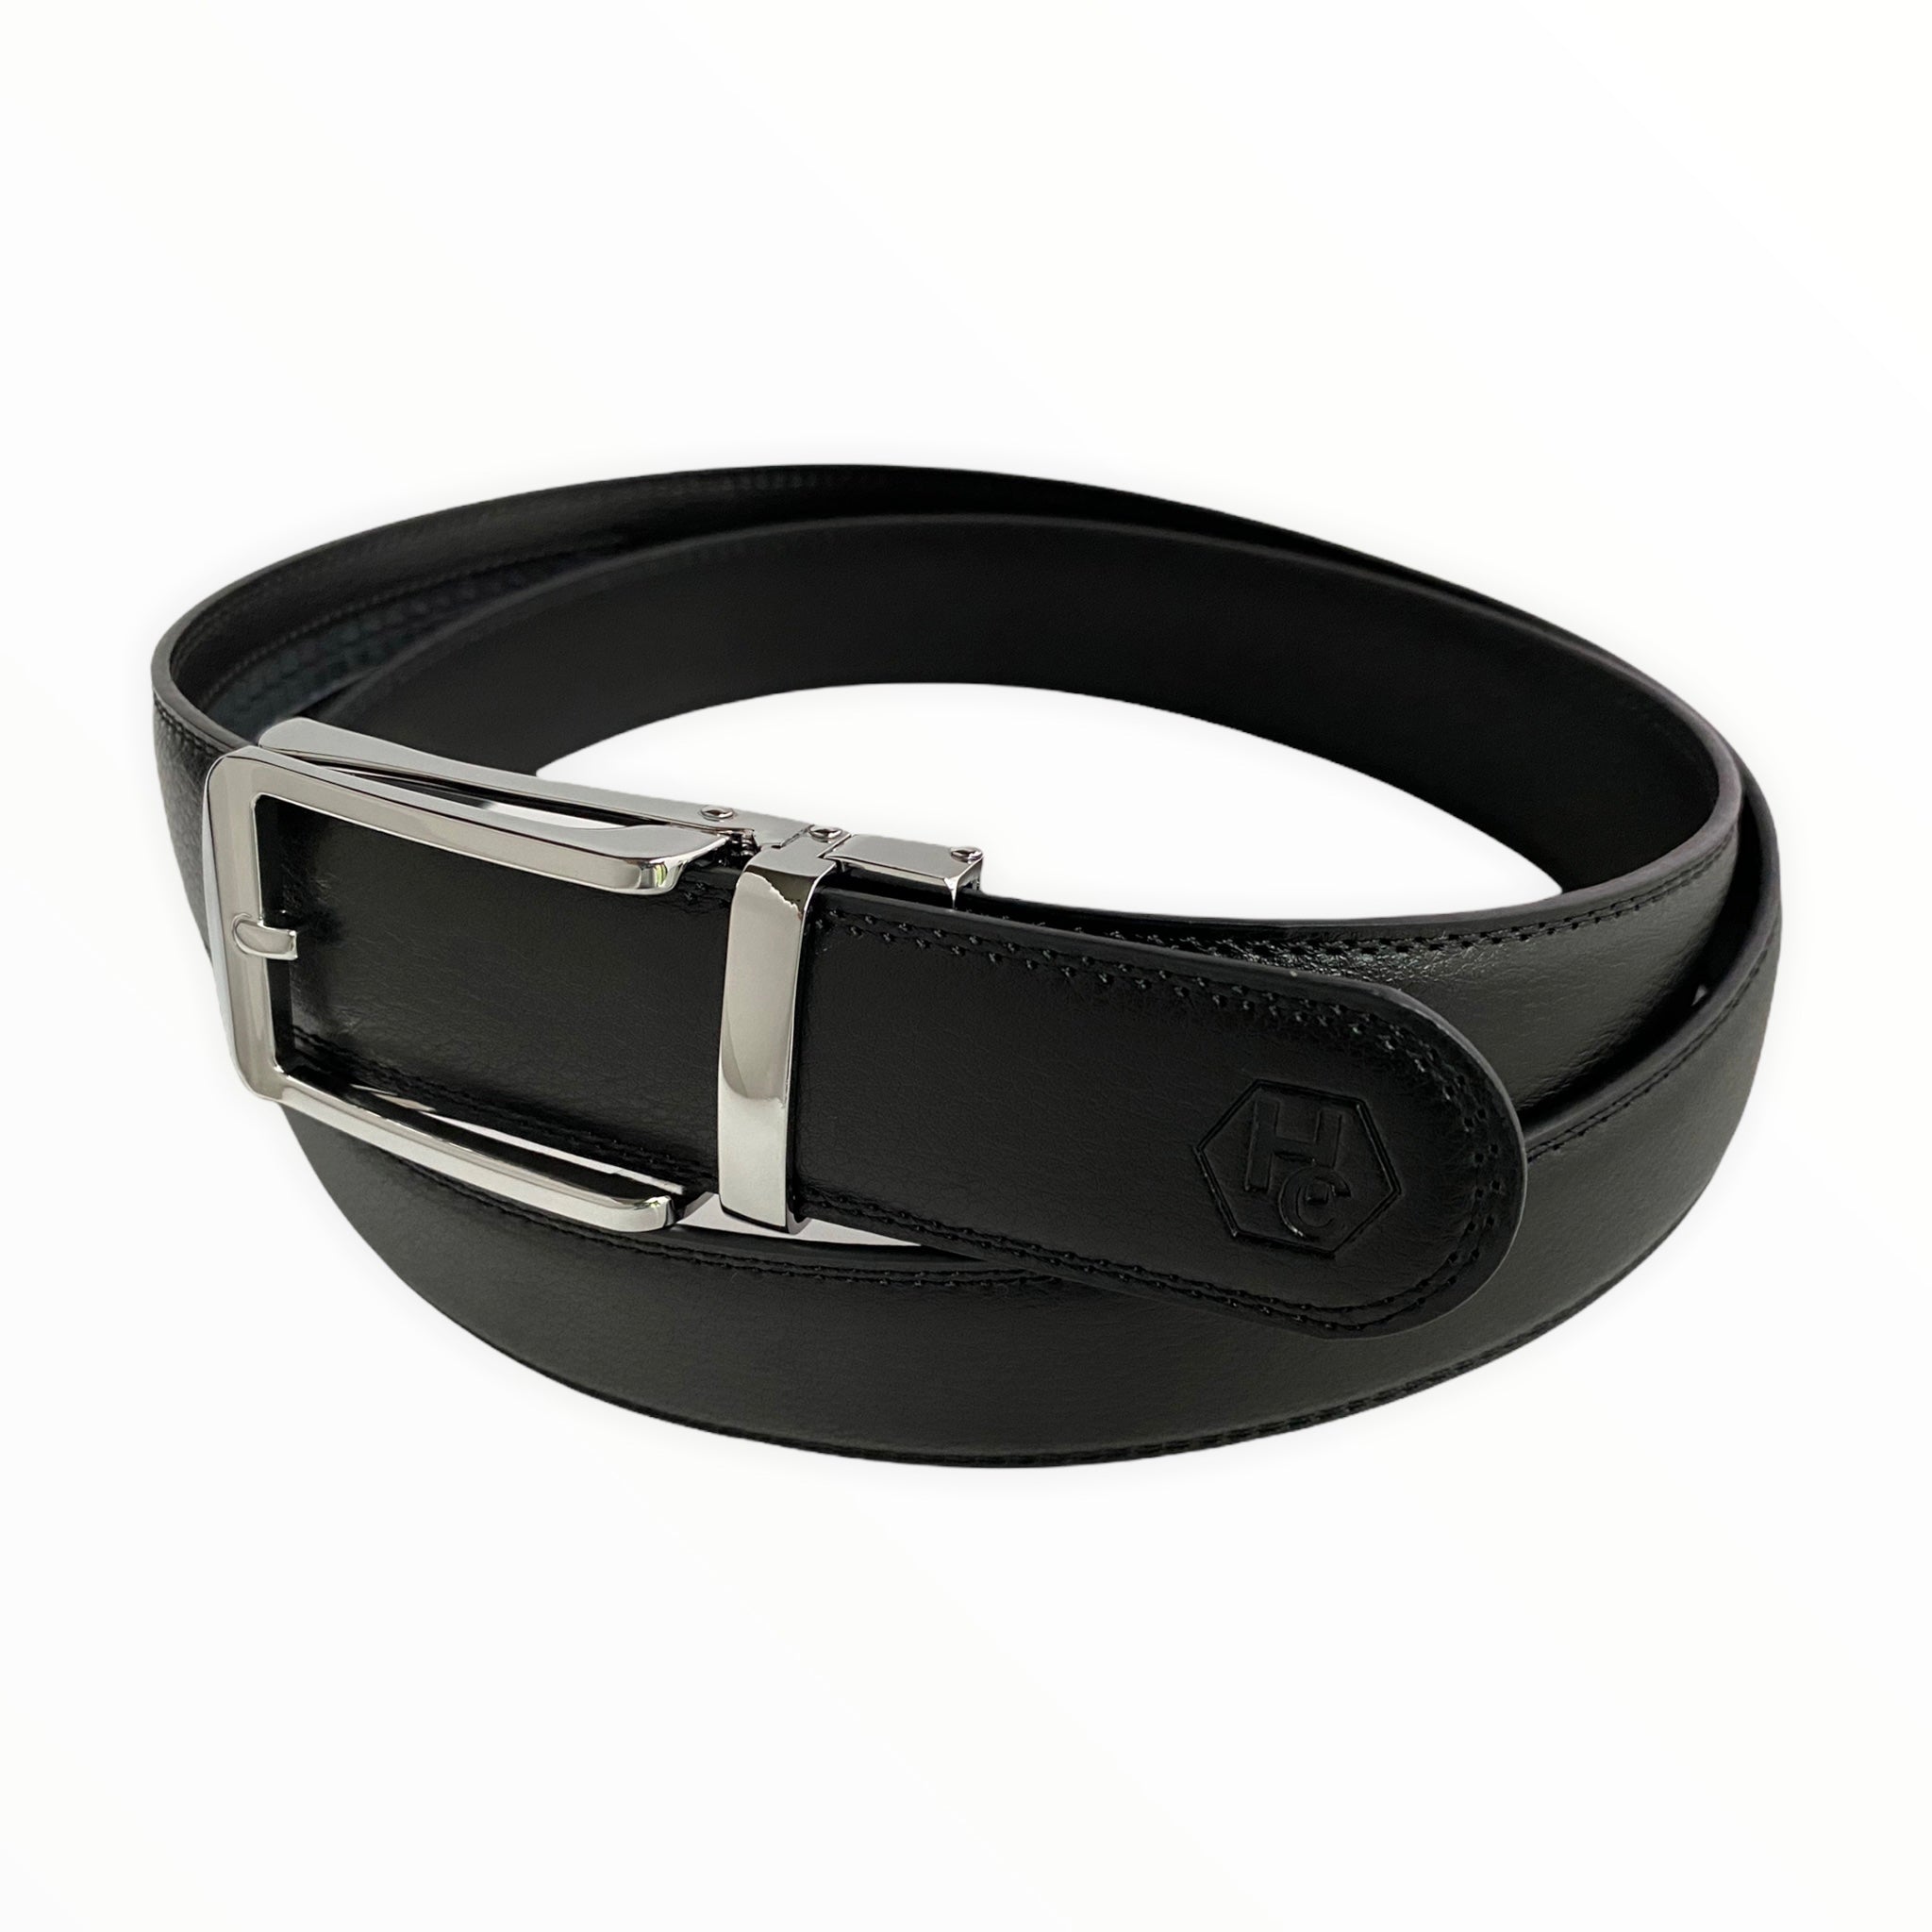 1.38" Genuine Leather Black Strap And 1.38" Automatic Buckle Silver Hollow